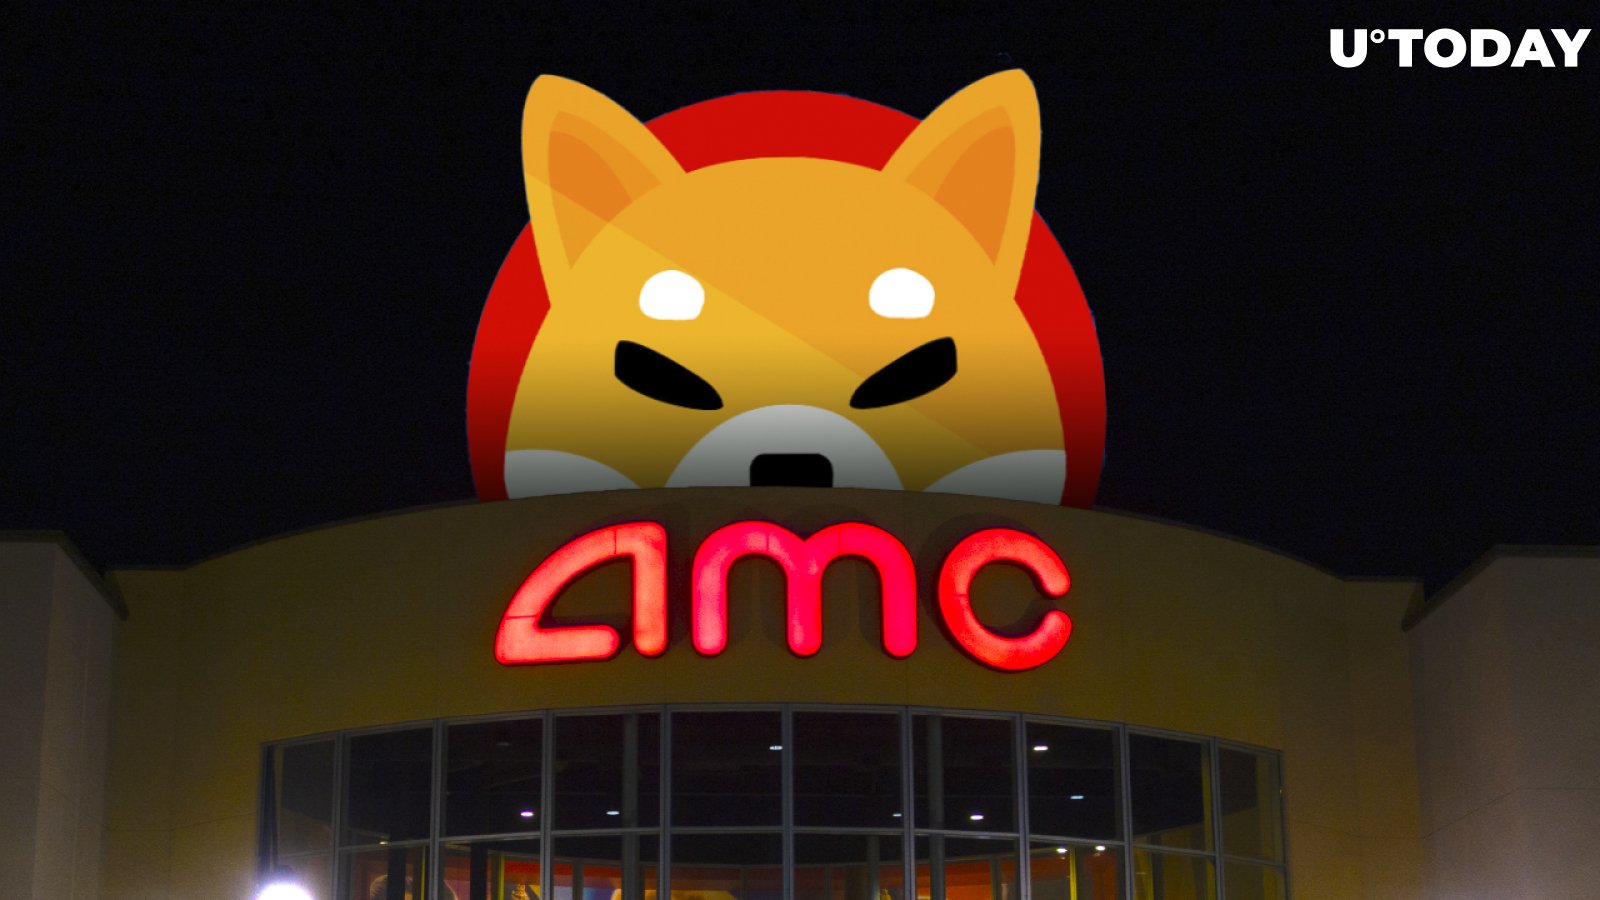 "Dogecoin Killer" Shiba Inu Coming to Movie Theater Giant AMC